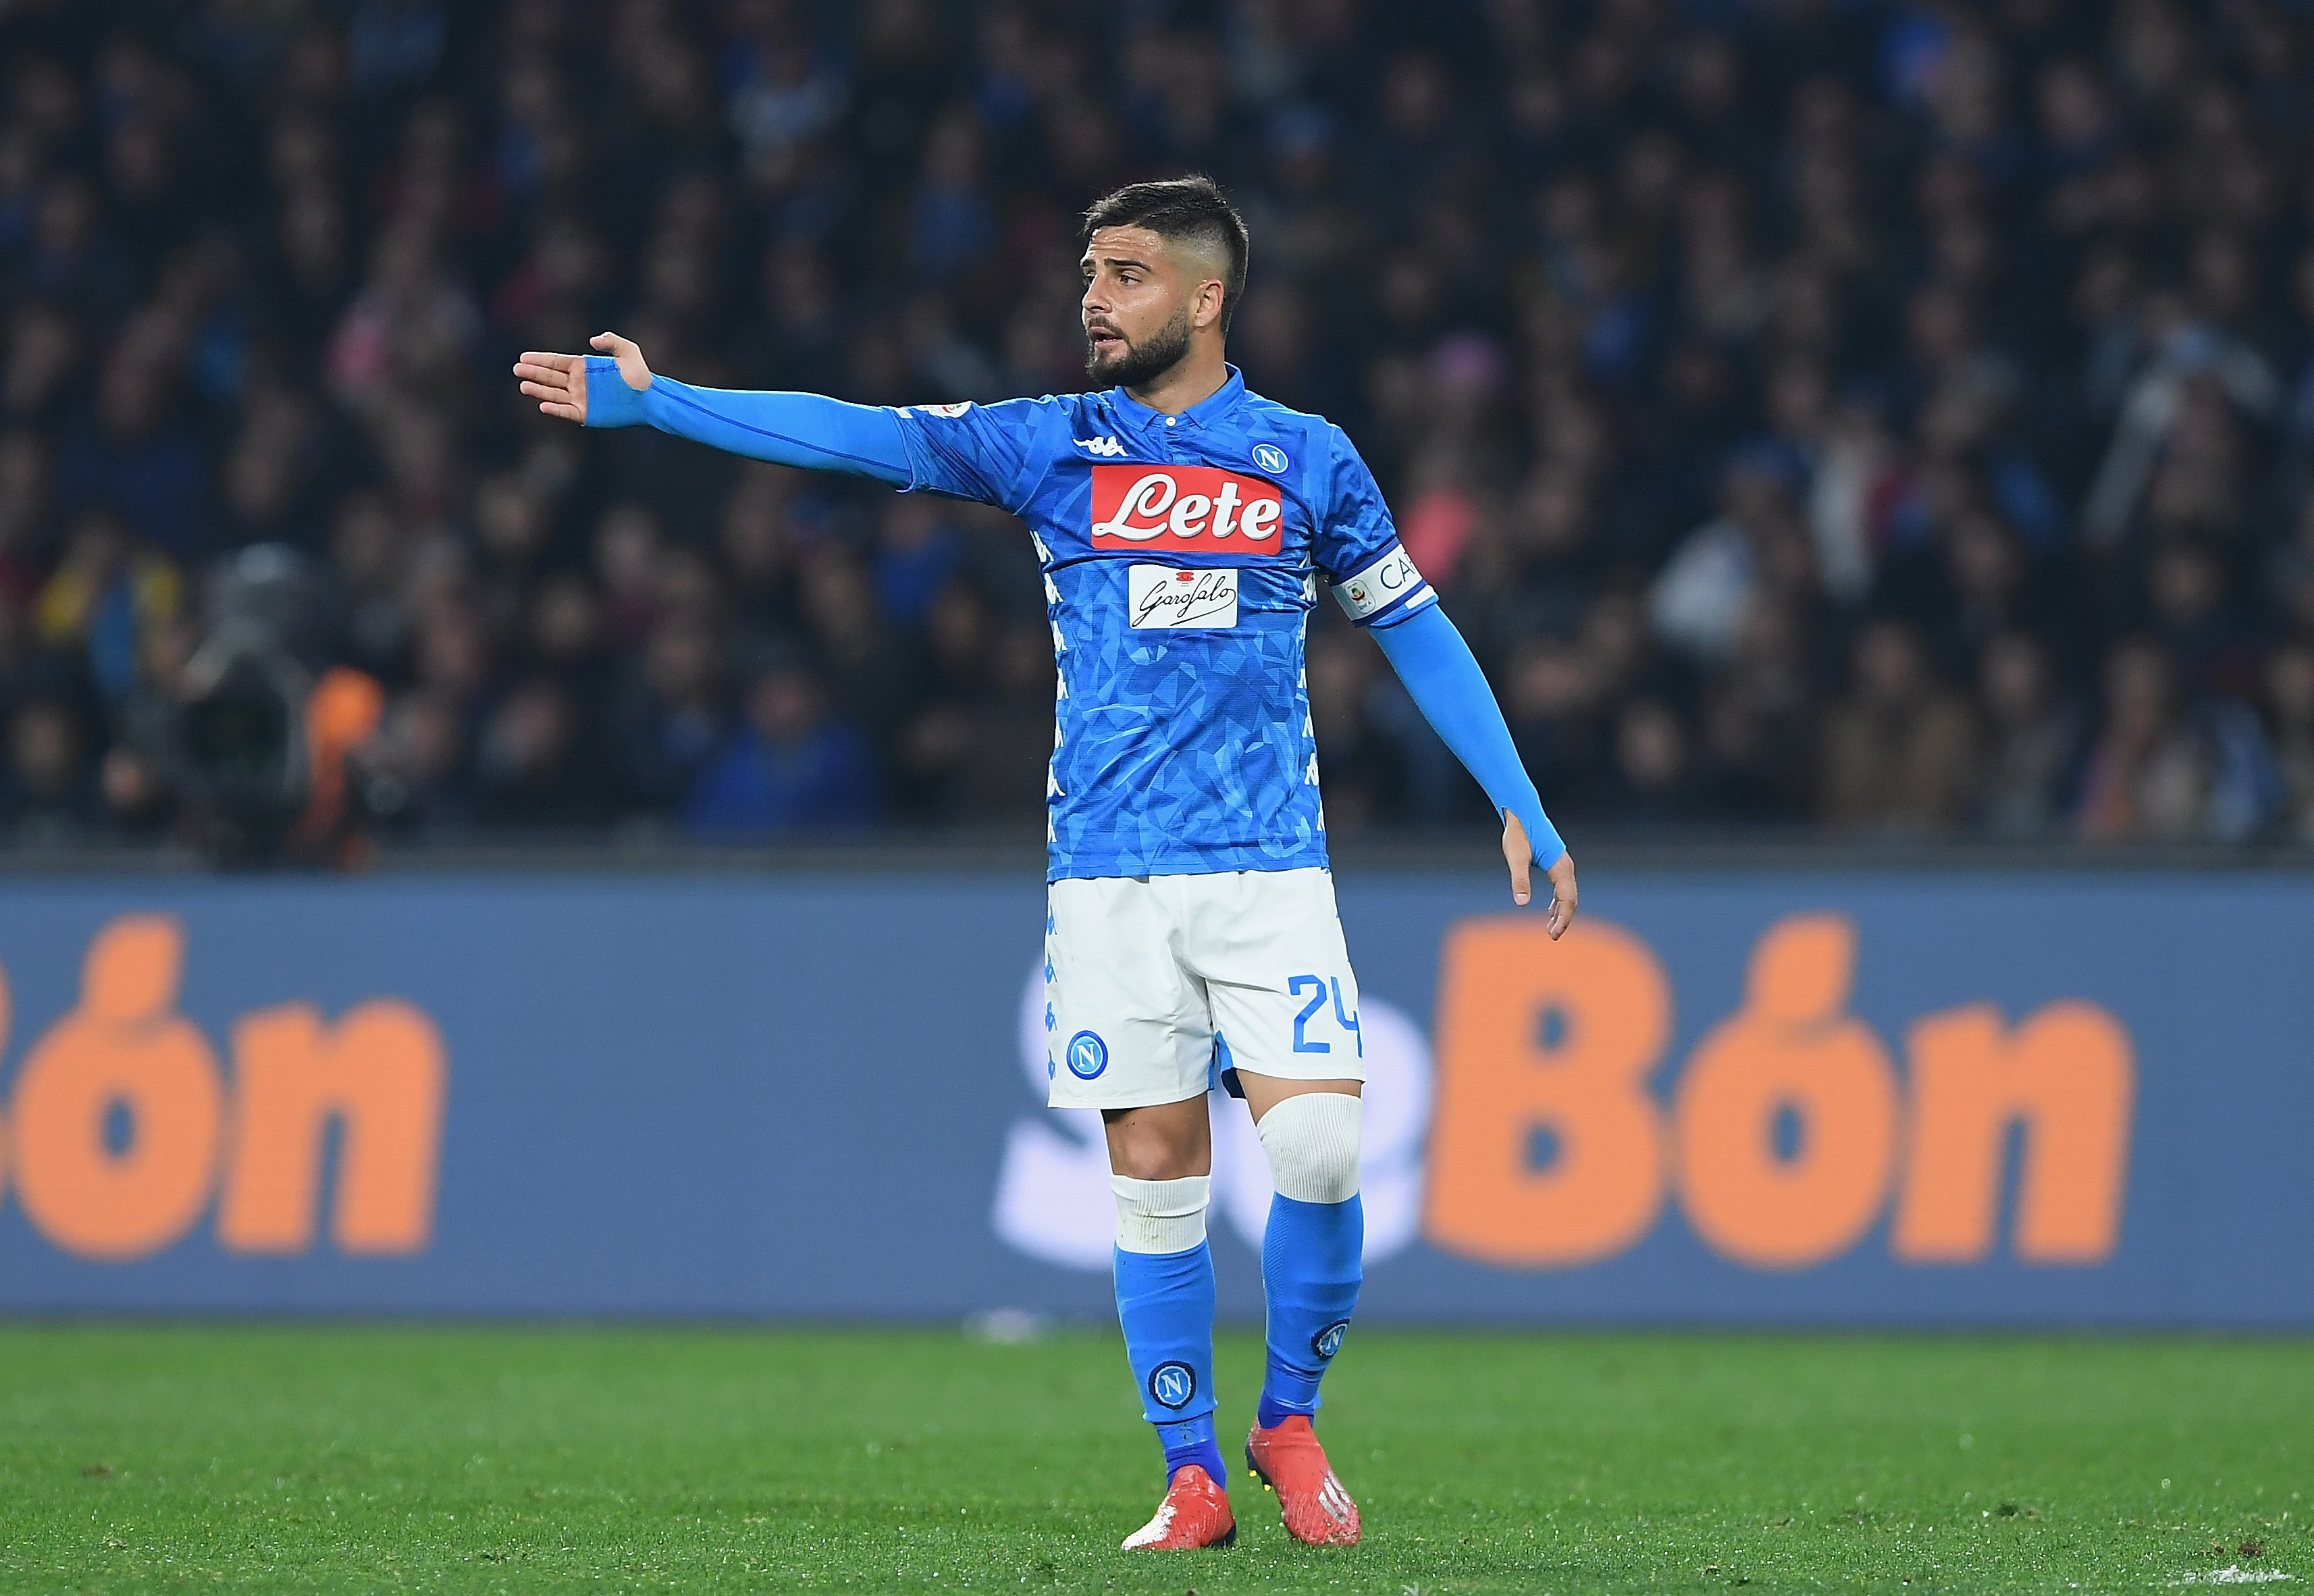 NAPLES, ITALY - MARCH 03:  Lorenzo Insigne of SSC Napoli in action during the Serie A match between SSC Napoli and Juventus at Stadio San Paolo on March 3, 2019 in Naples, Italy.  (Photo by Francesco Pecoraro/Getty Images)